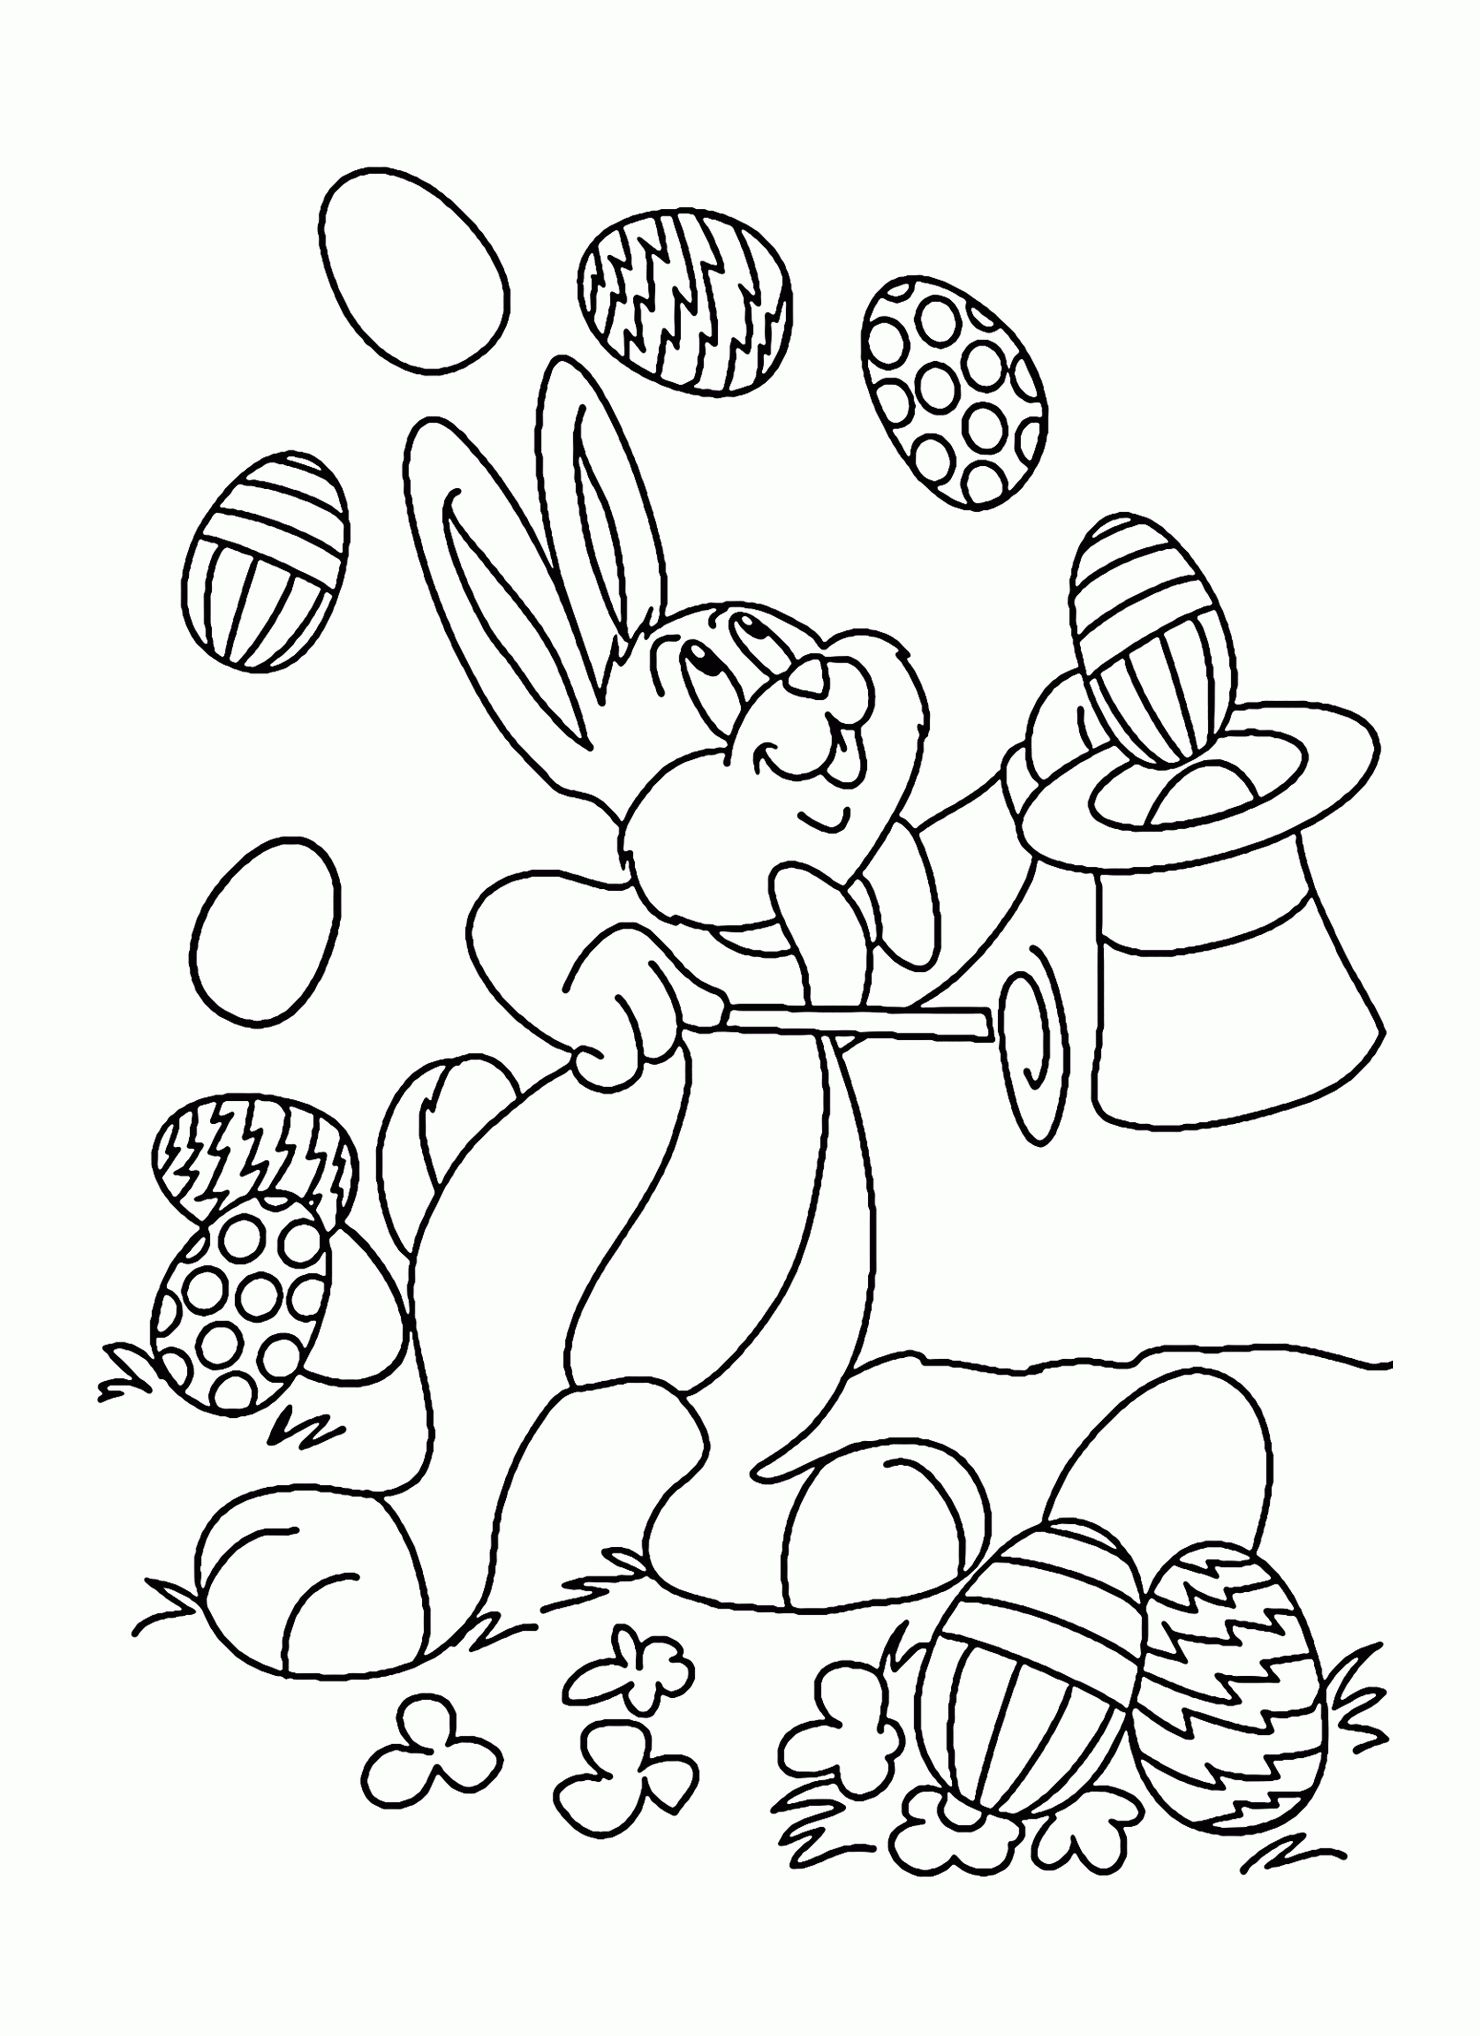 Download 15 Printable Easter Coloring Pages - Holiday Vault